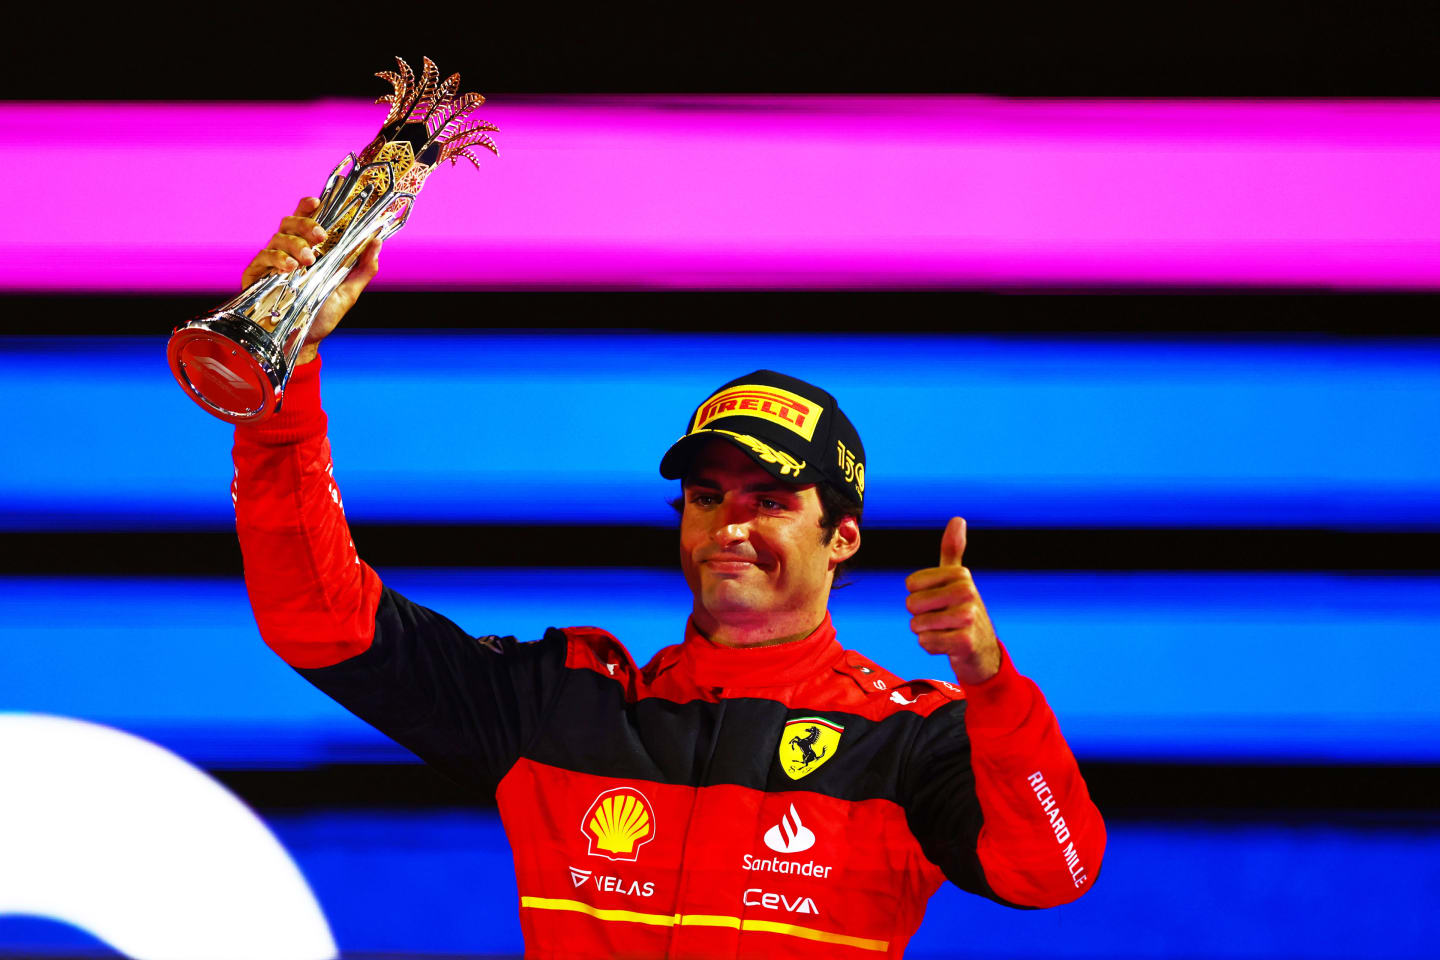 JEDDAH, SAUDI ARABIA - MARCH 27: Third placed Carlos Sainz of Spain and Ferrari celebrates on the podium during the F1 Grand Prix of Saudi Arabia at the Jeddah Corniche Circuit on March 27, 2022 in Jeddah, Saudi Arabia. (Photo by Mark Thompson/Getty Images)